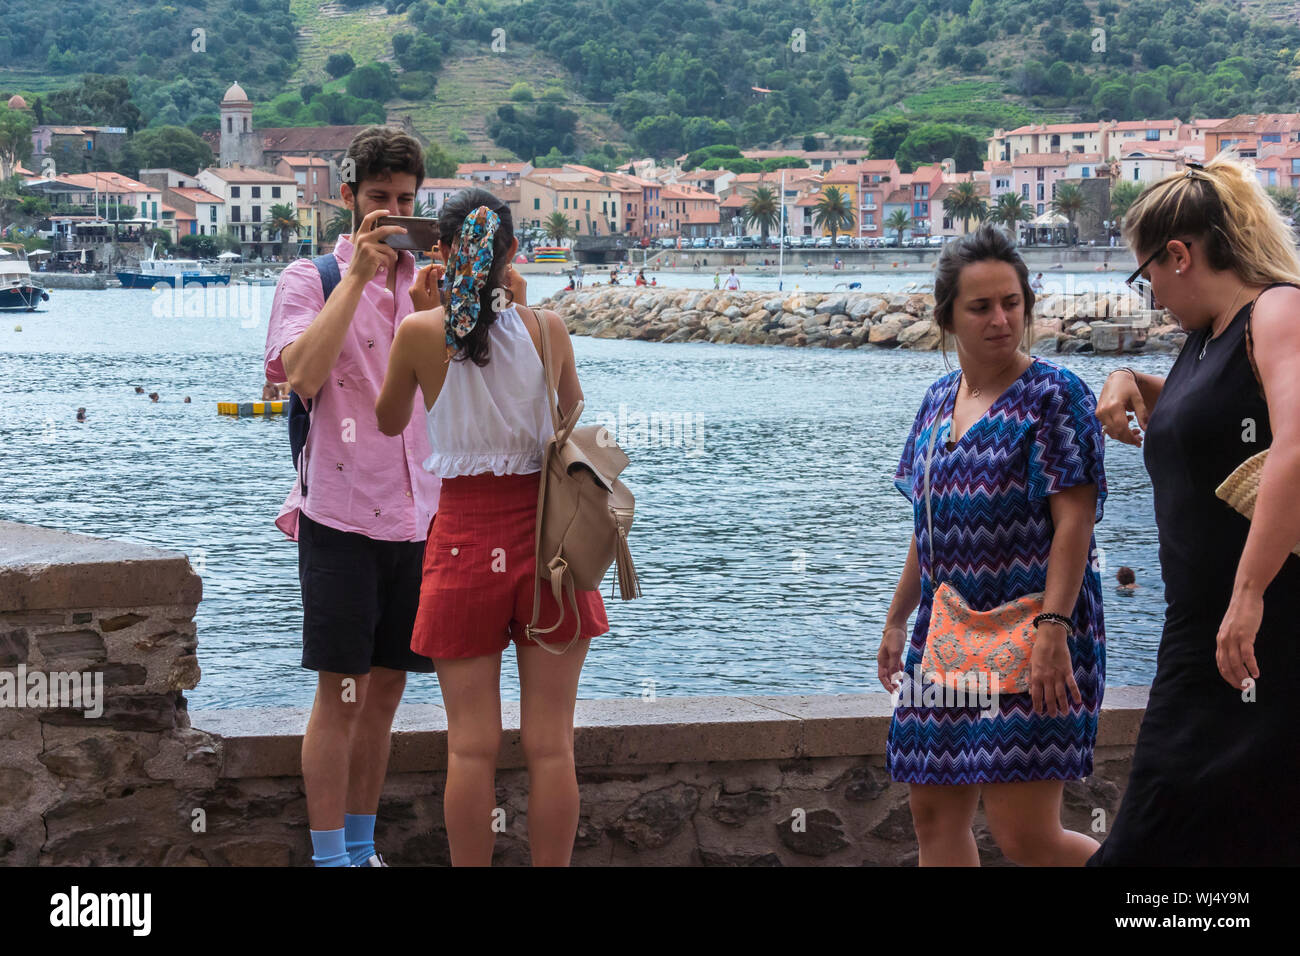 Tourists Visiting Seaside Town, Collioure, France, a commune in the southern French department of Pyrénées- Orientales. teenage holidays Stock Photo